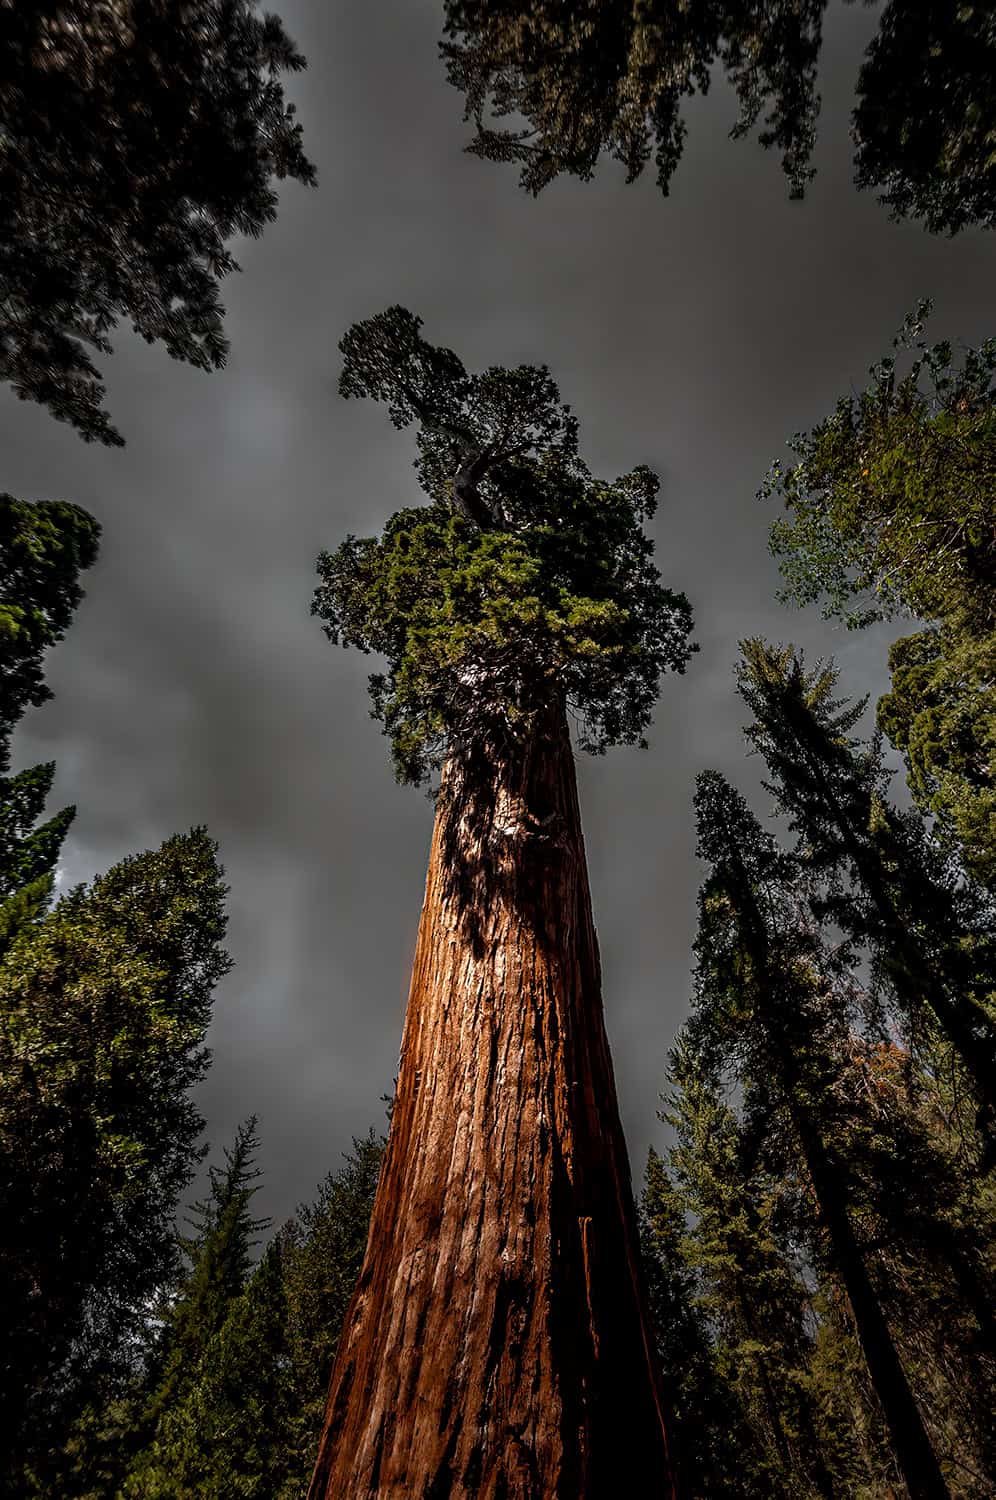 An upward view of the General Grant tree with dark skies in King's Canyon